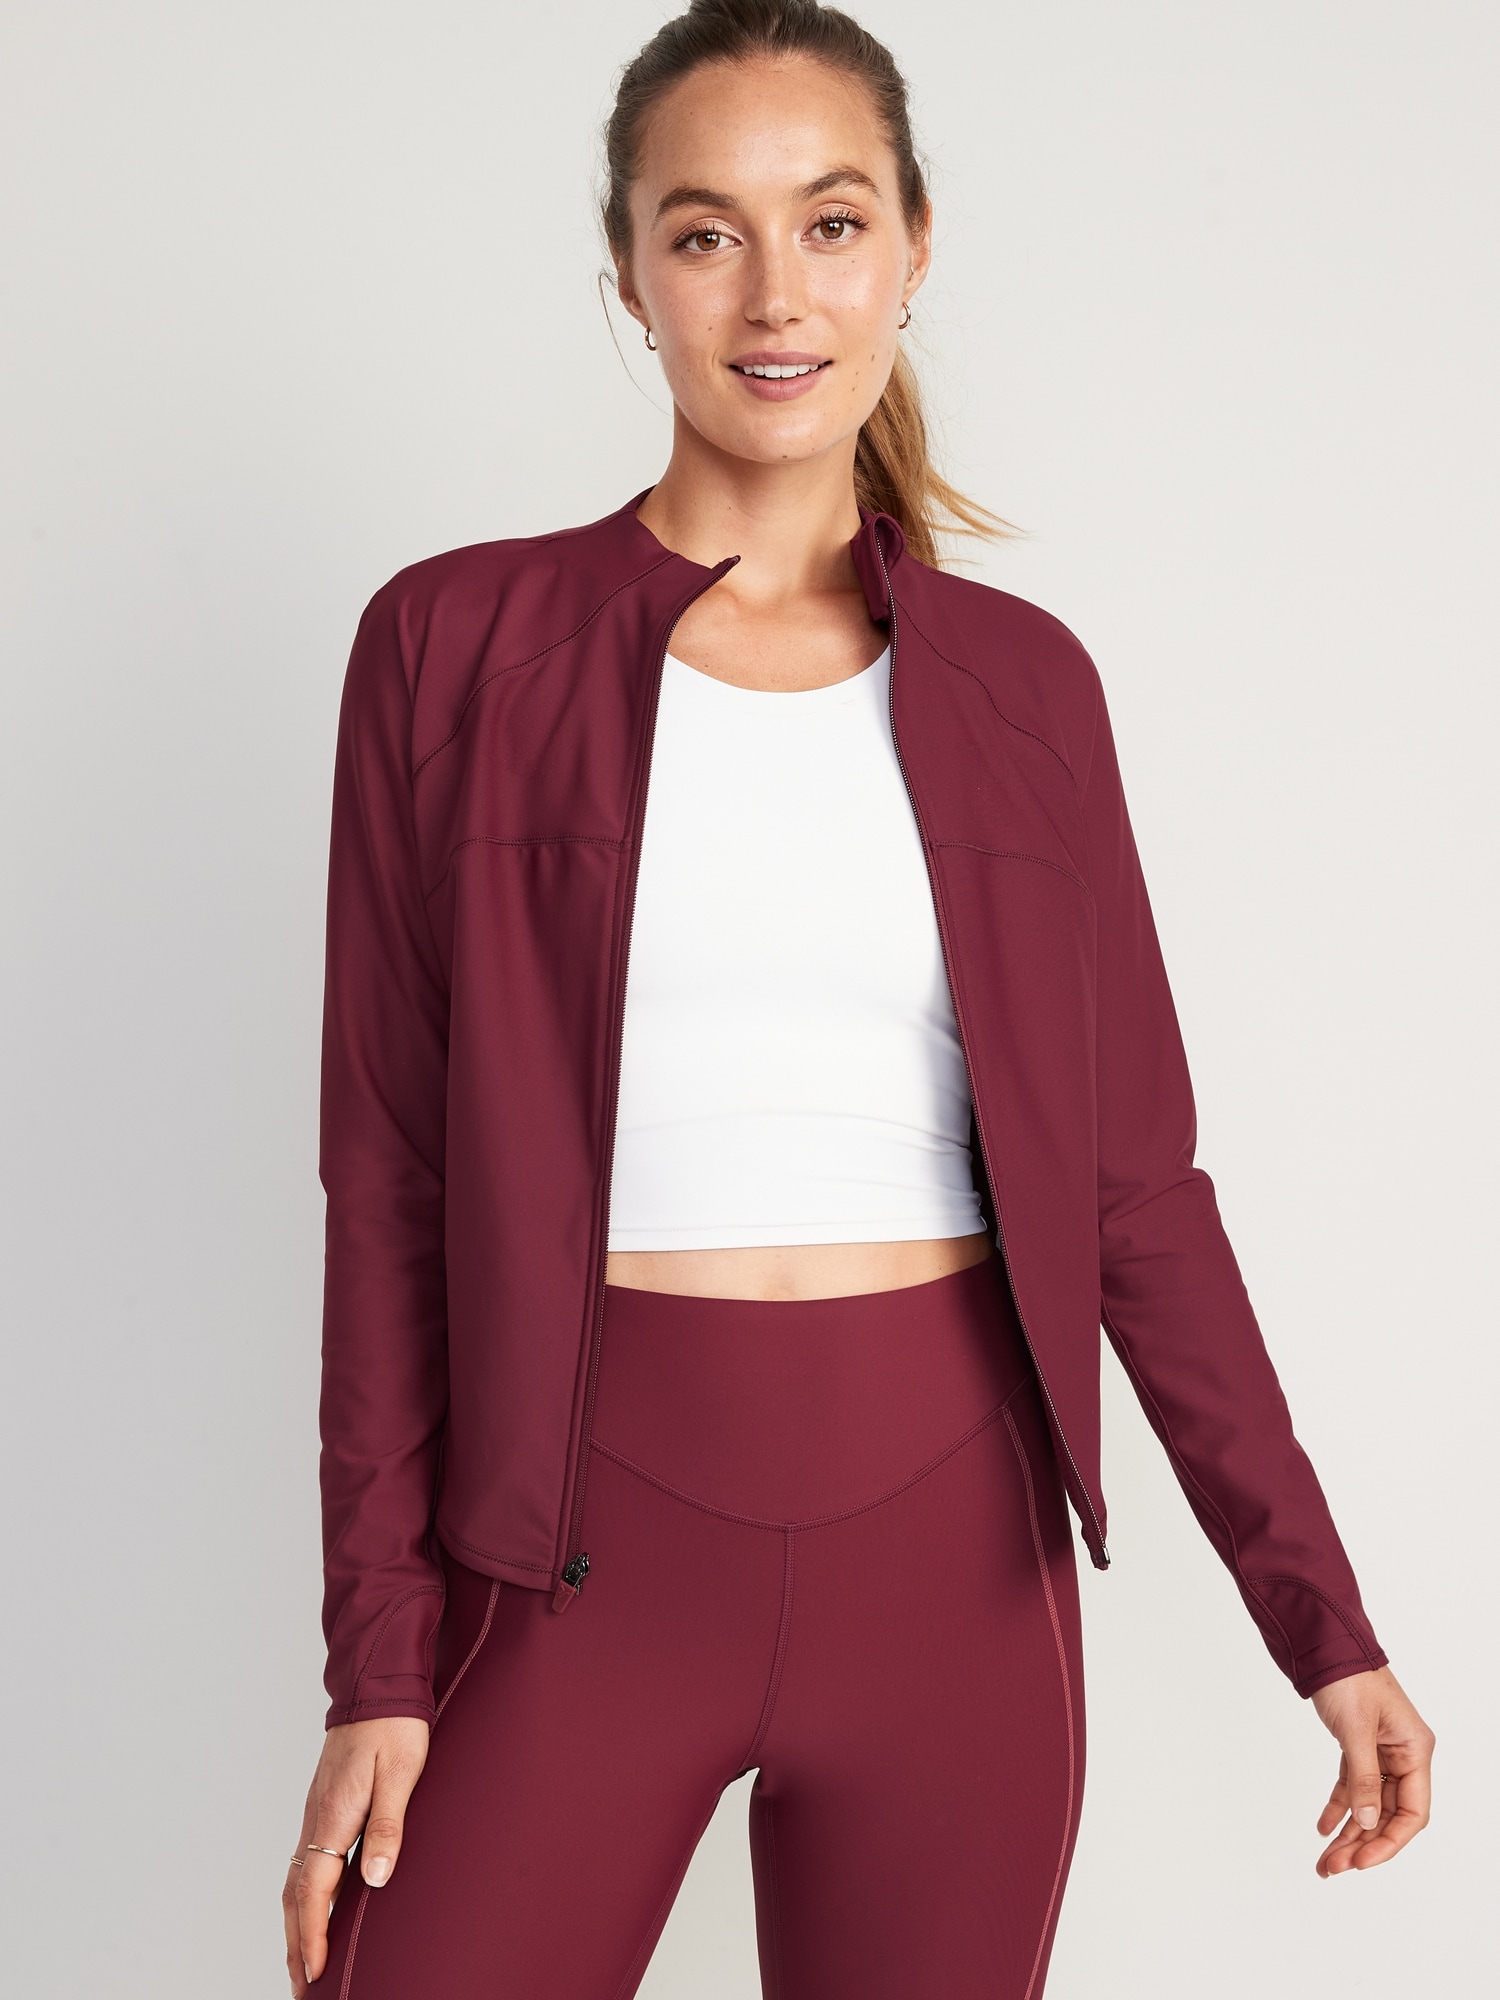 PowerSoft Cropped Full-Zip Performance Jacket for Women | Old Navy